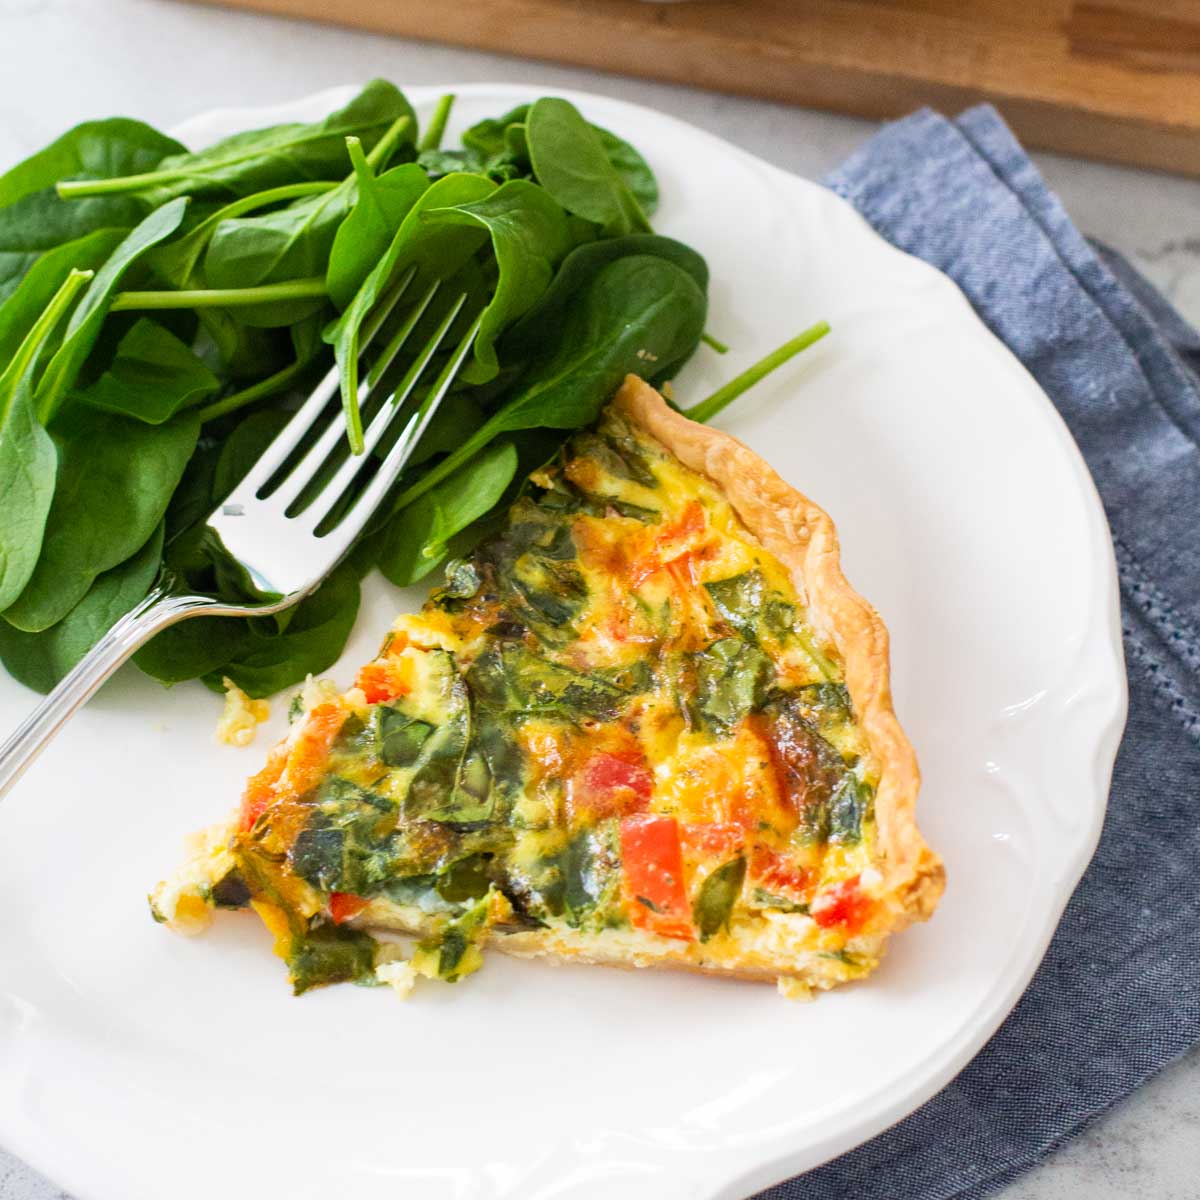 A slice of spinach quiche is on a plate next to additional baby spinach.